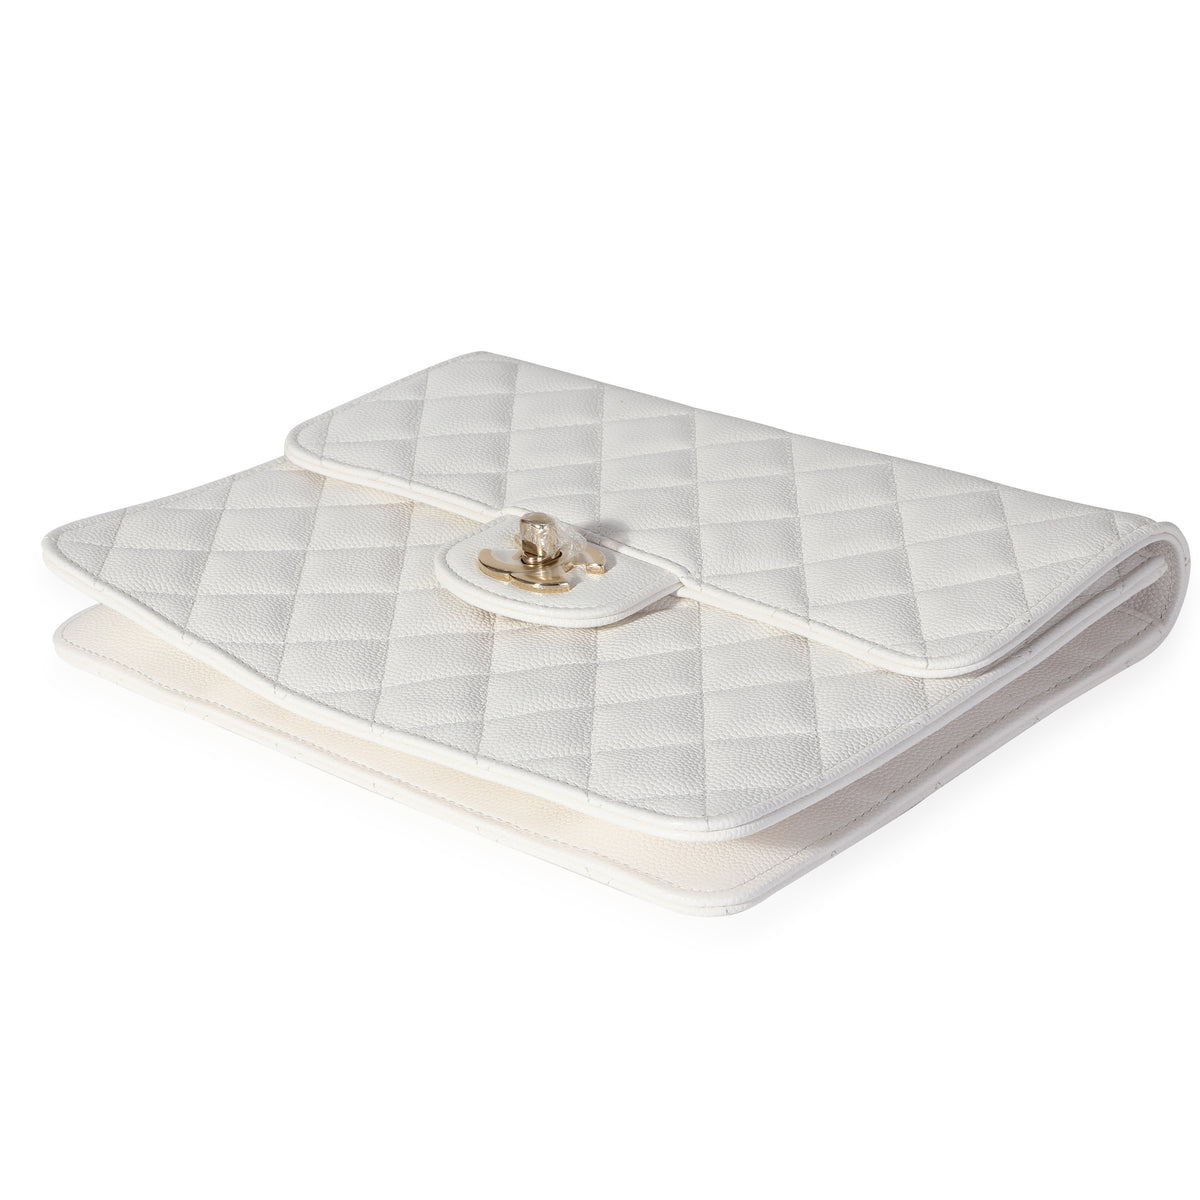 Chanel White Quilted Caviar Classic Flap Case